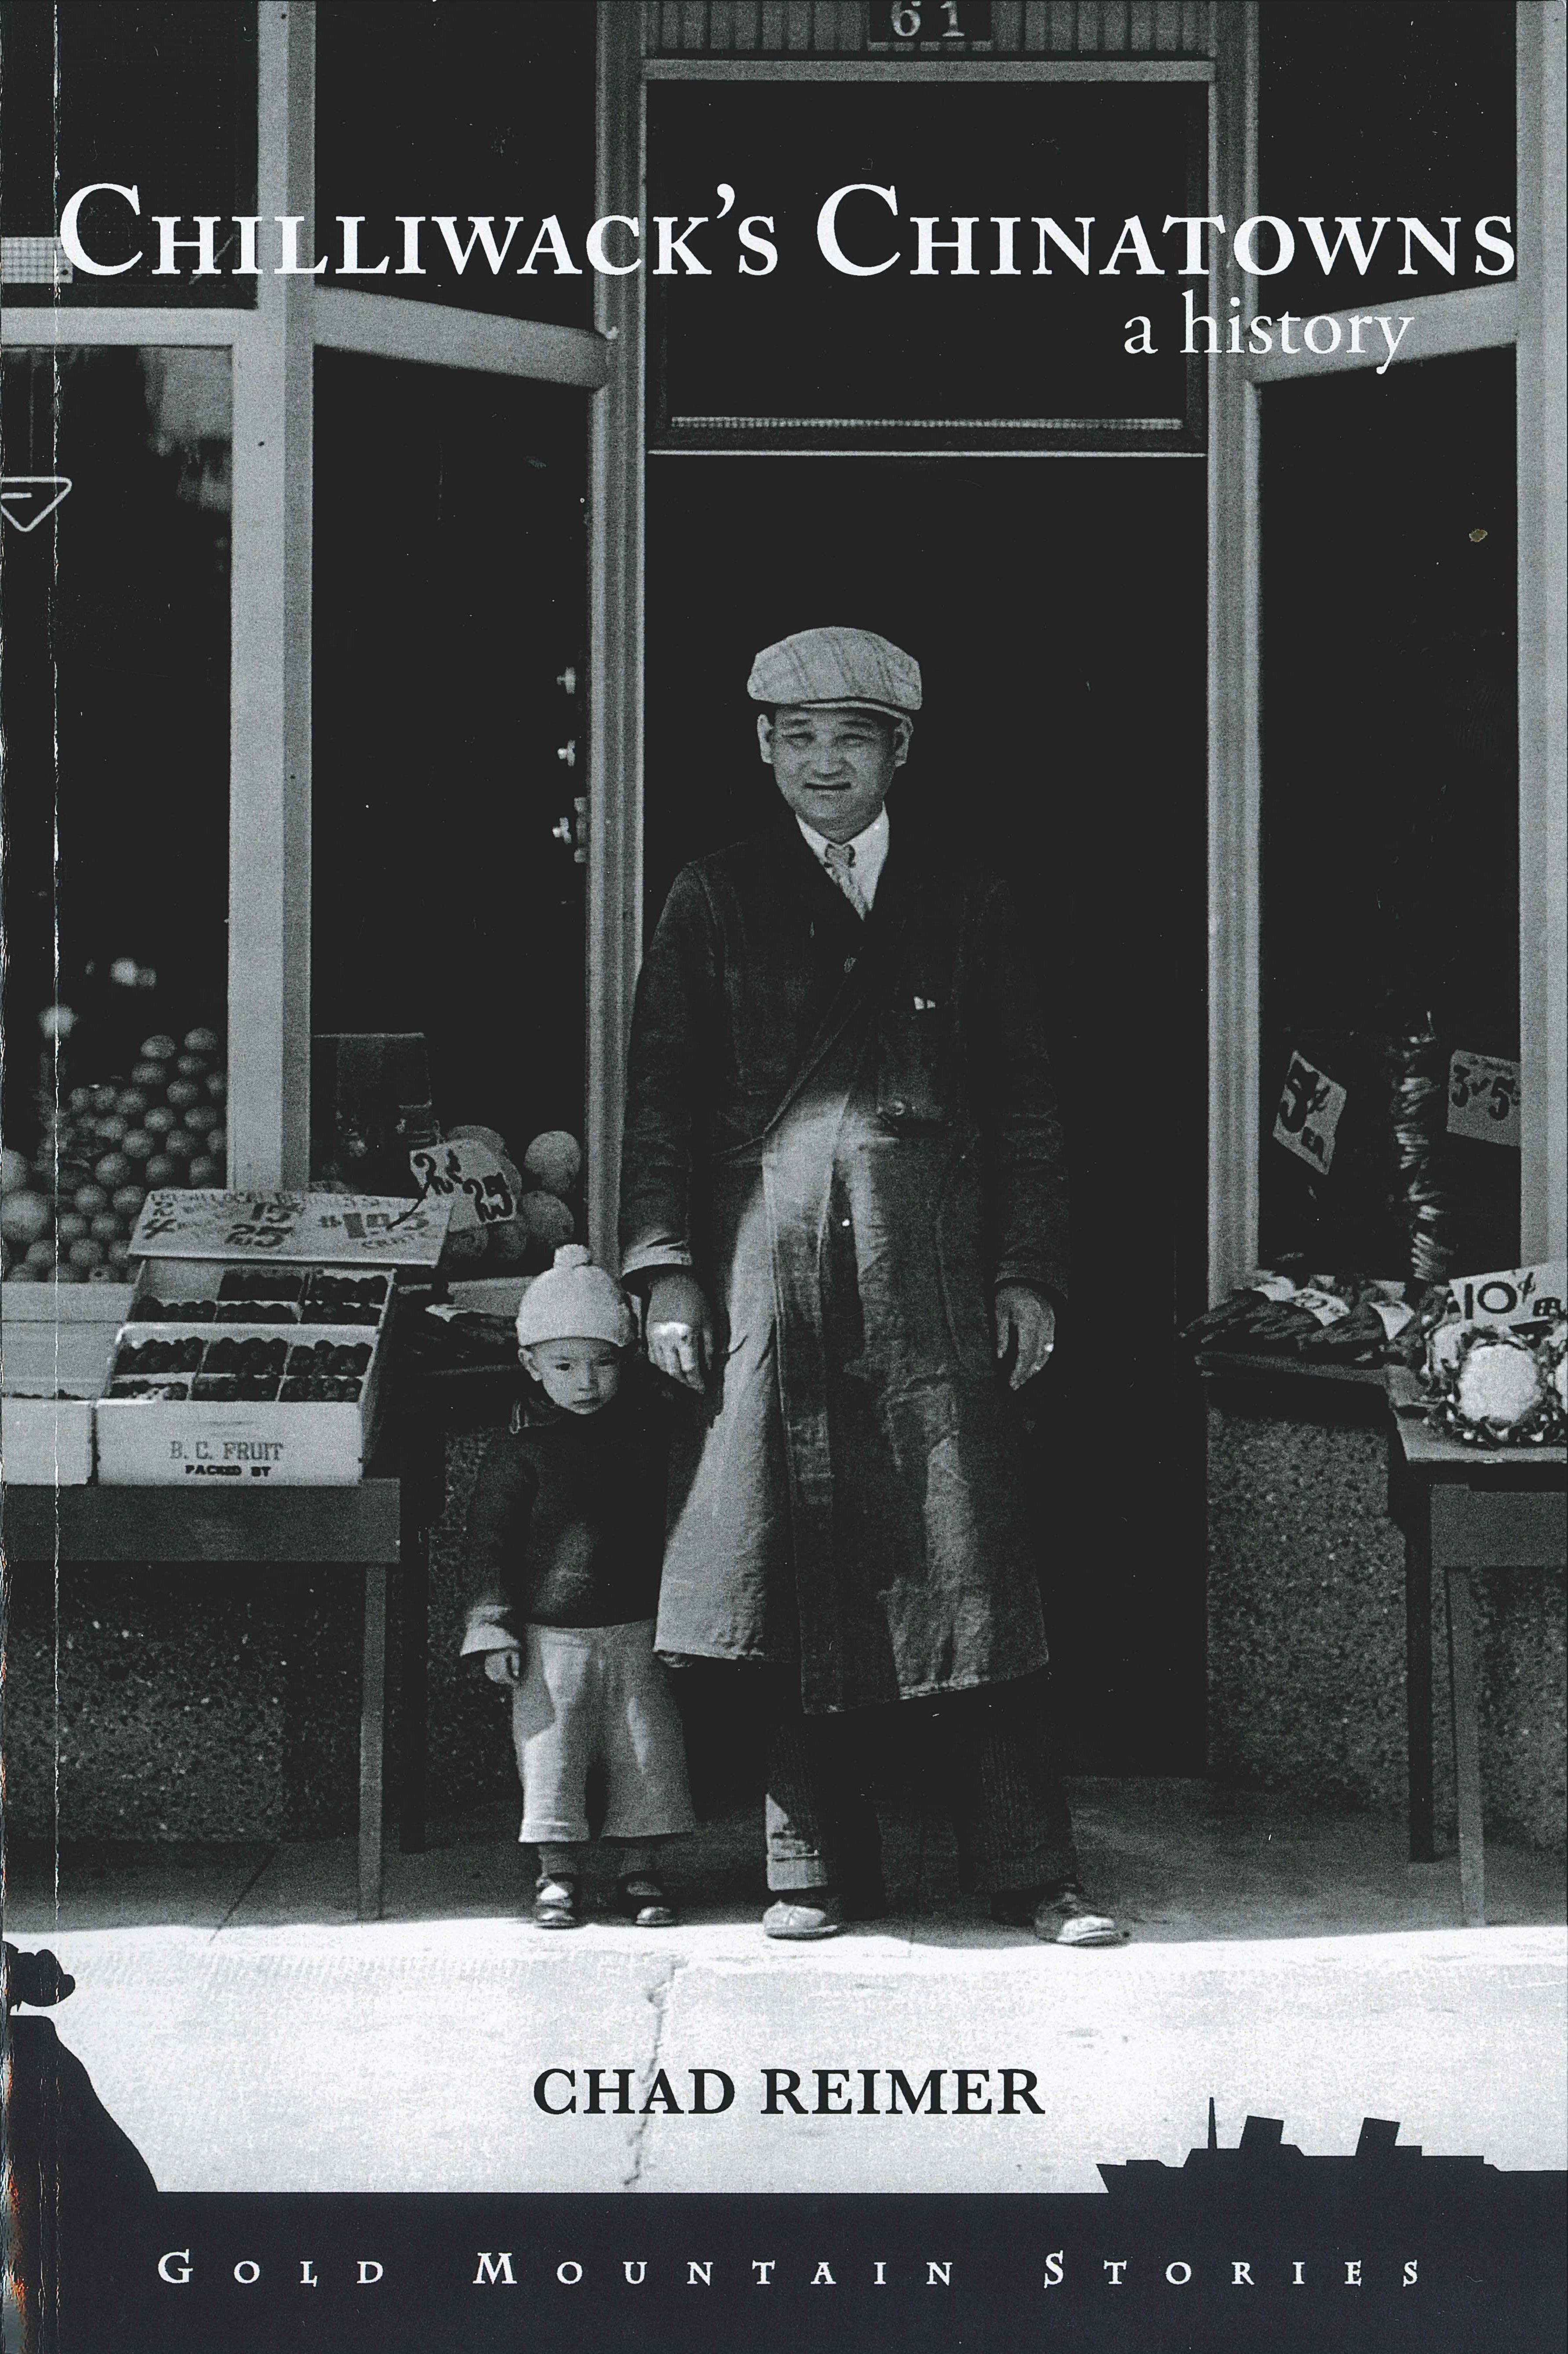 Front cover of the book, “Chilliwack’s Chinatowns: A History,” by Dr. Chad Reimer. The cover has a black and white photo of a young boy and a man standing hand in hand in front of a merchant’s store. Fruit stalls are to the left and vegetable stalls are to the right.